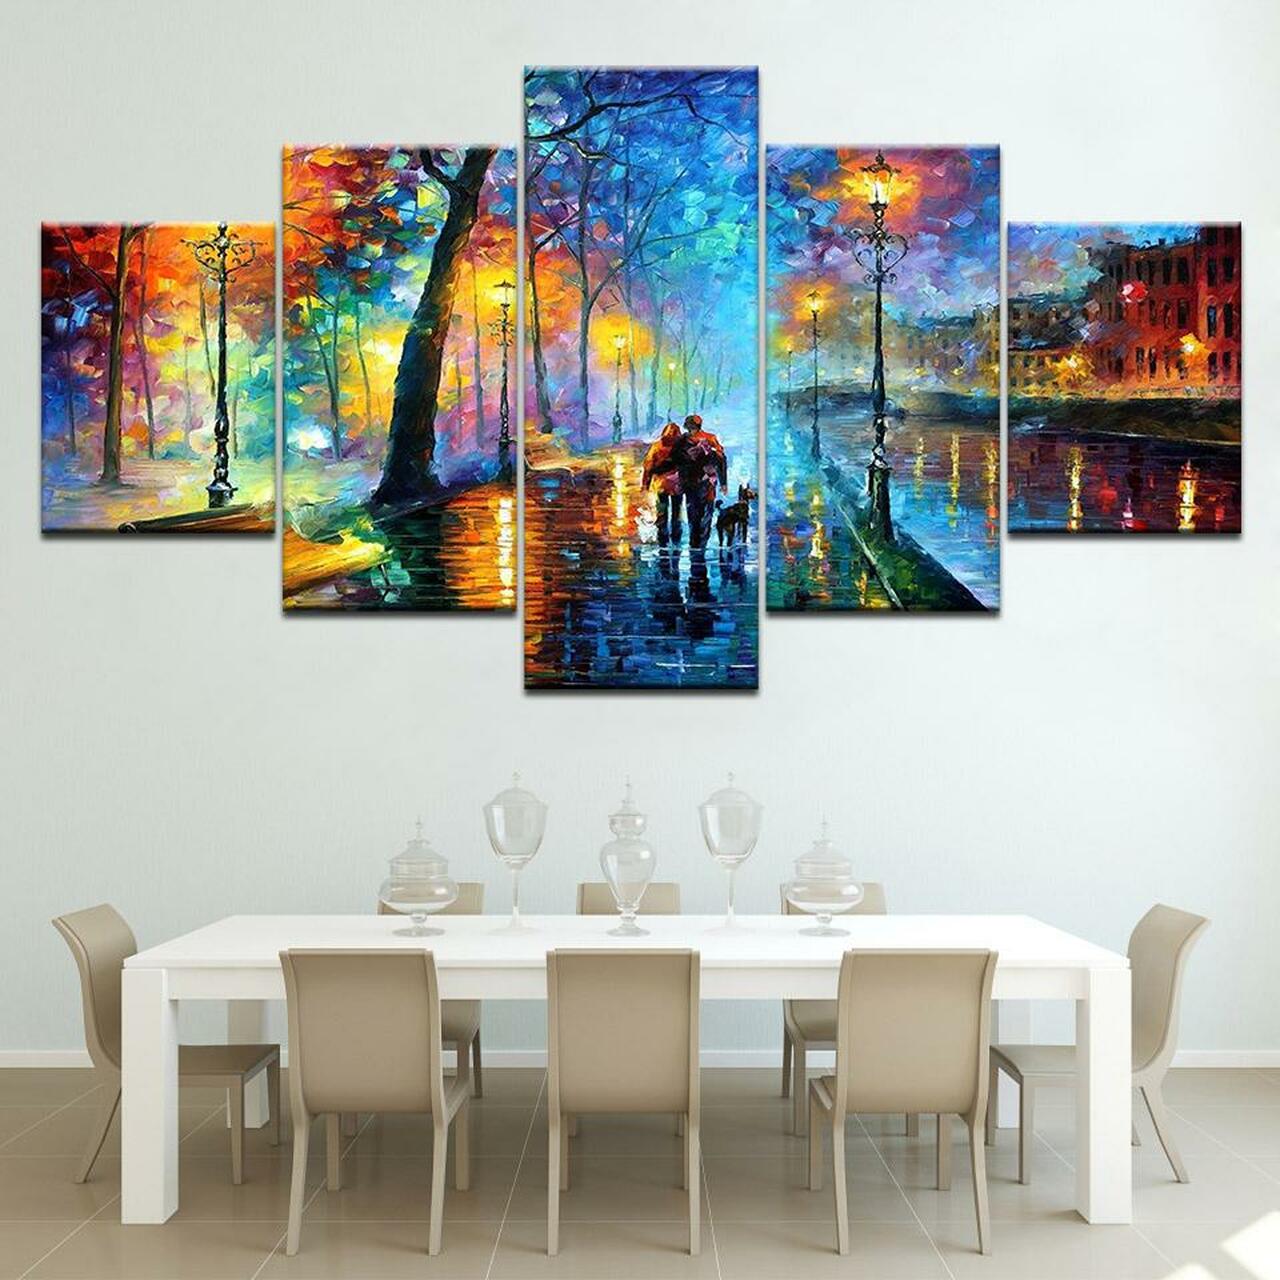 LET US WALK TOGETHER 5 Piece Canvas Art Wall Decor